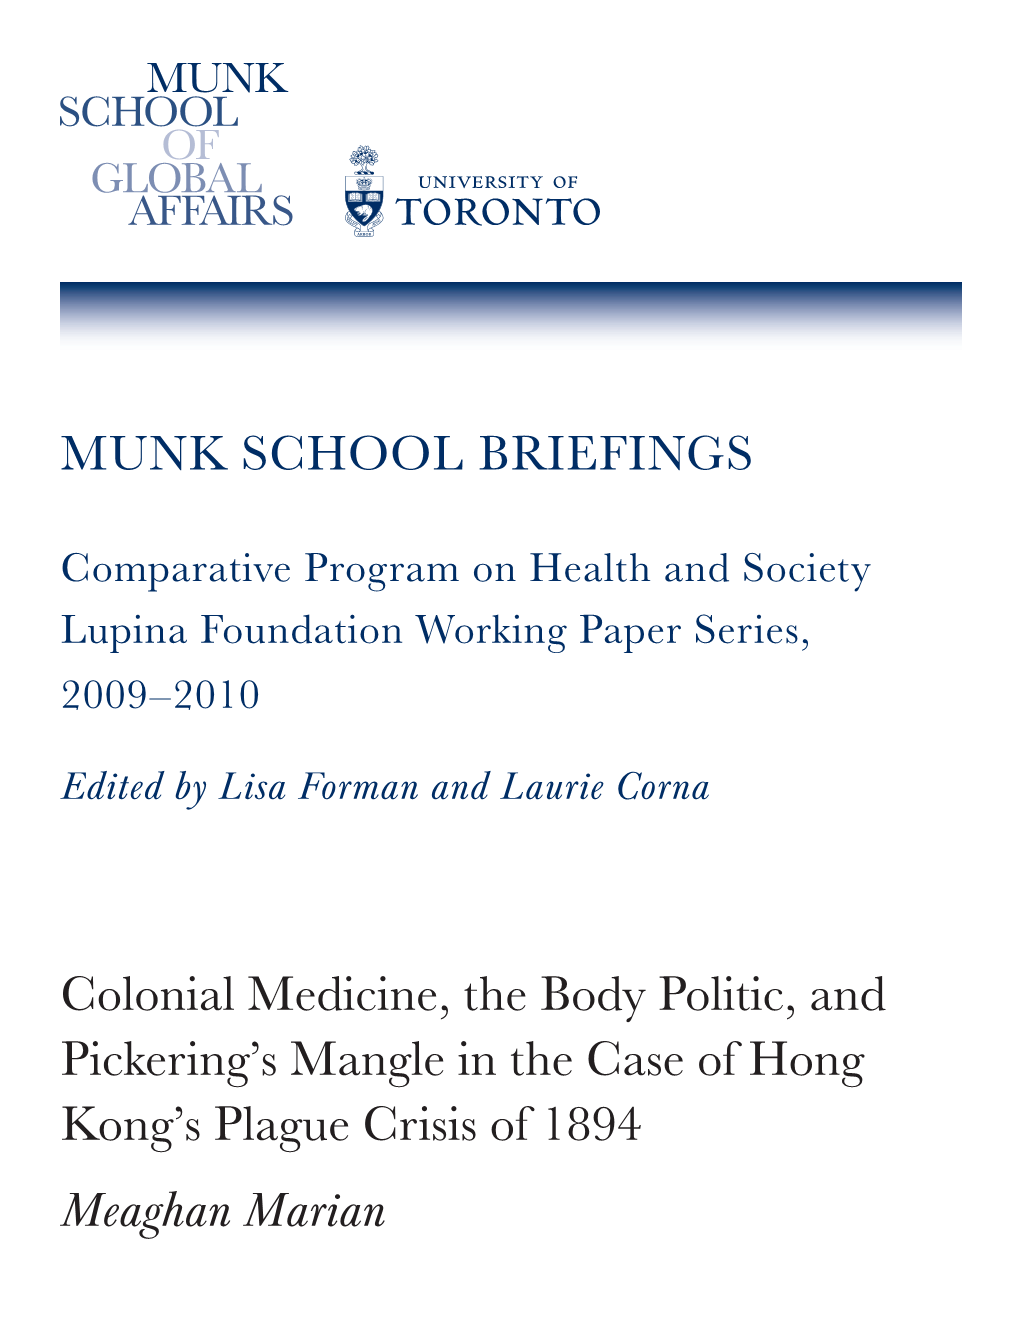 MUNK SCHOOL BRIEFINGS Colonial Medicine, the Body Politic, And